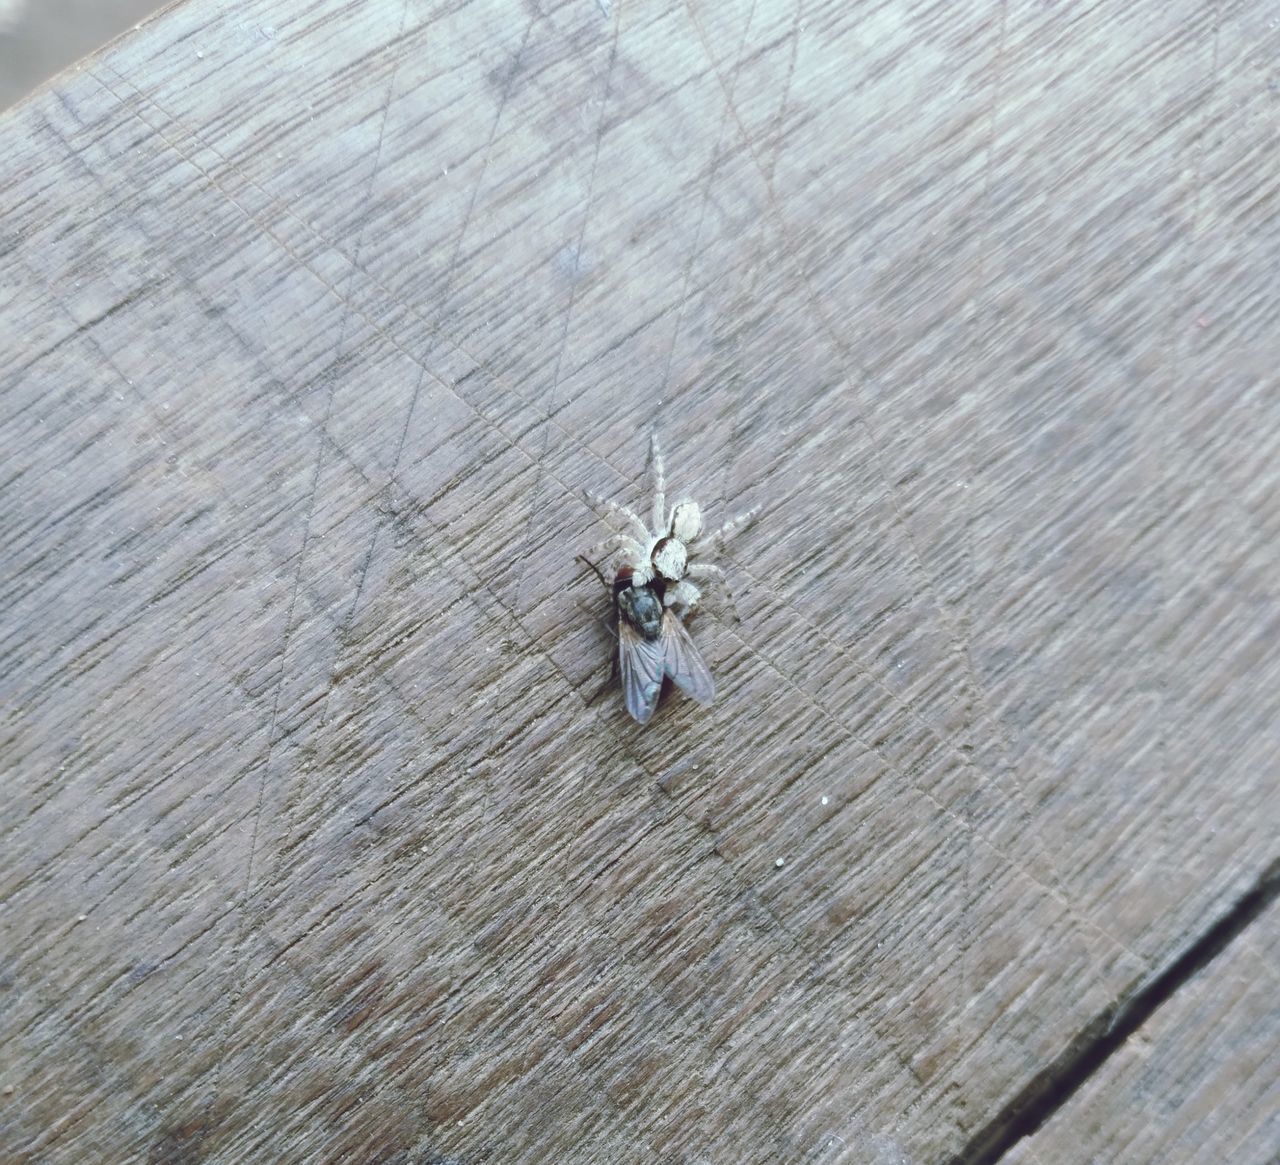 HIGH ANGLE VIEW OF SPIDER ON WOODEN WALL